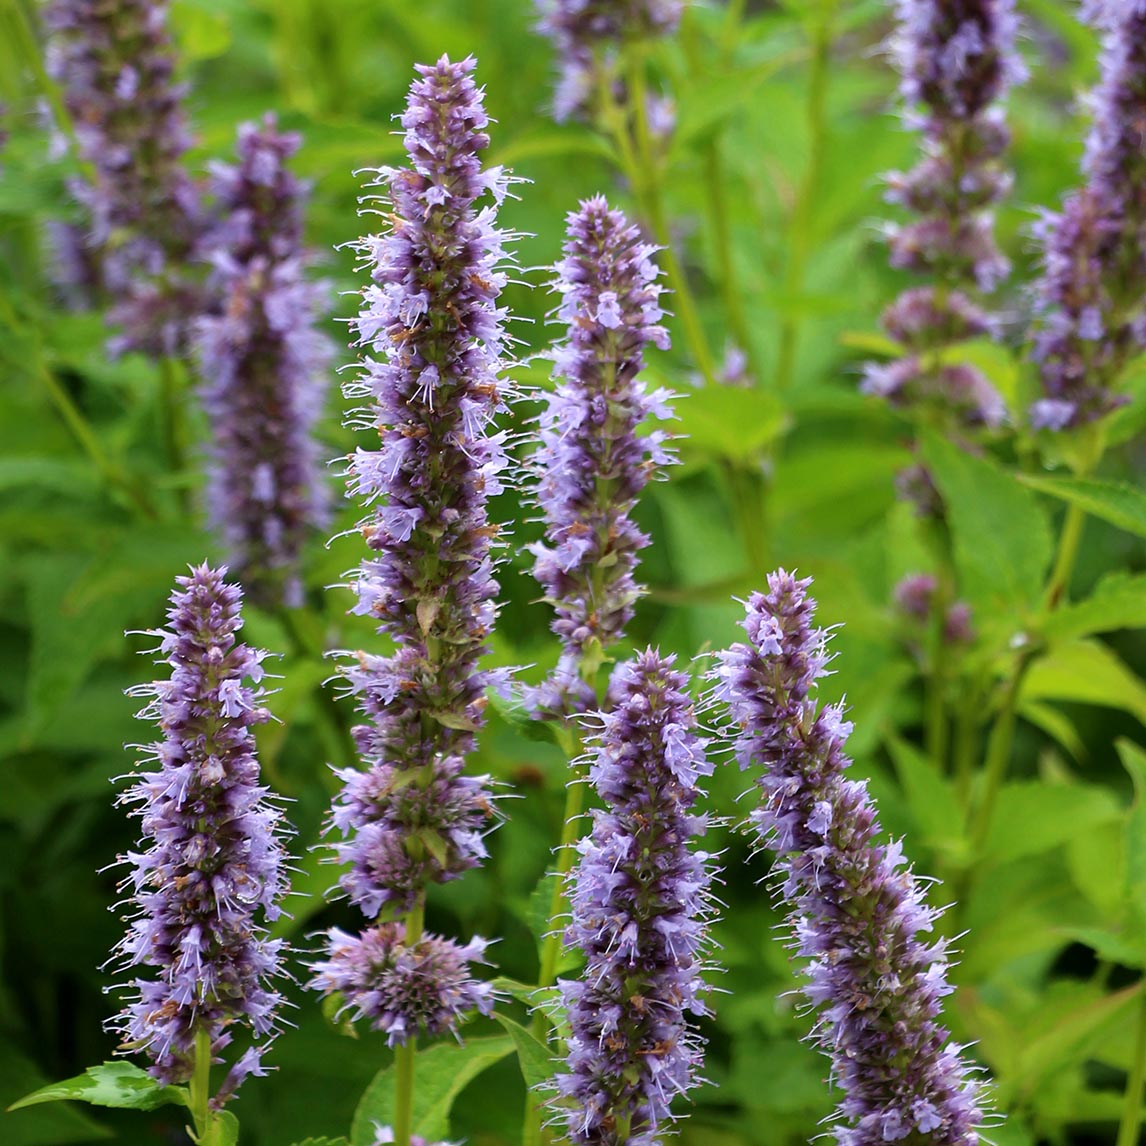 Agastache 'Blue Fortune' - The Diggers Club